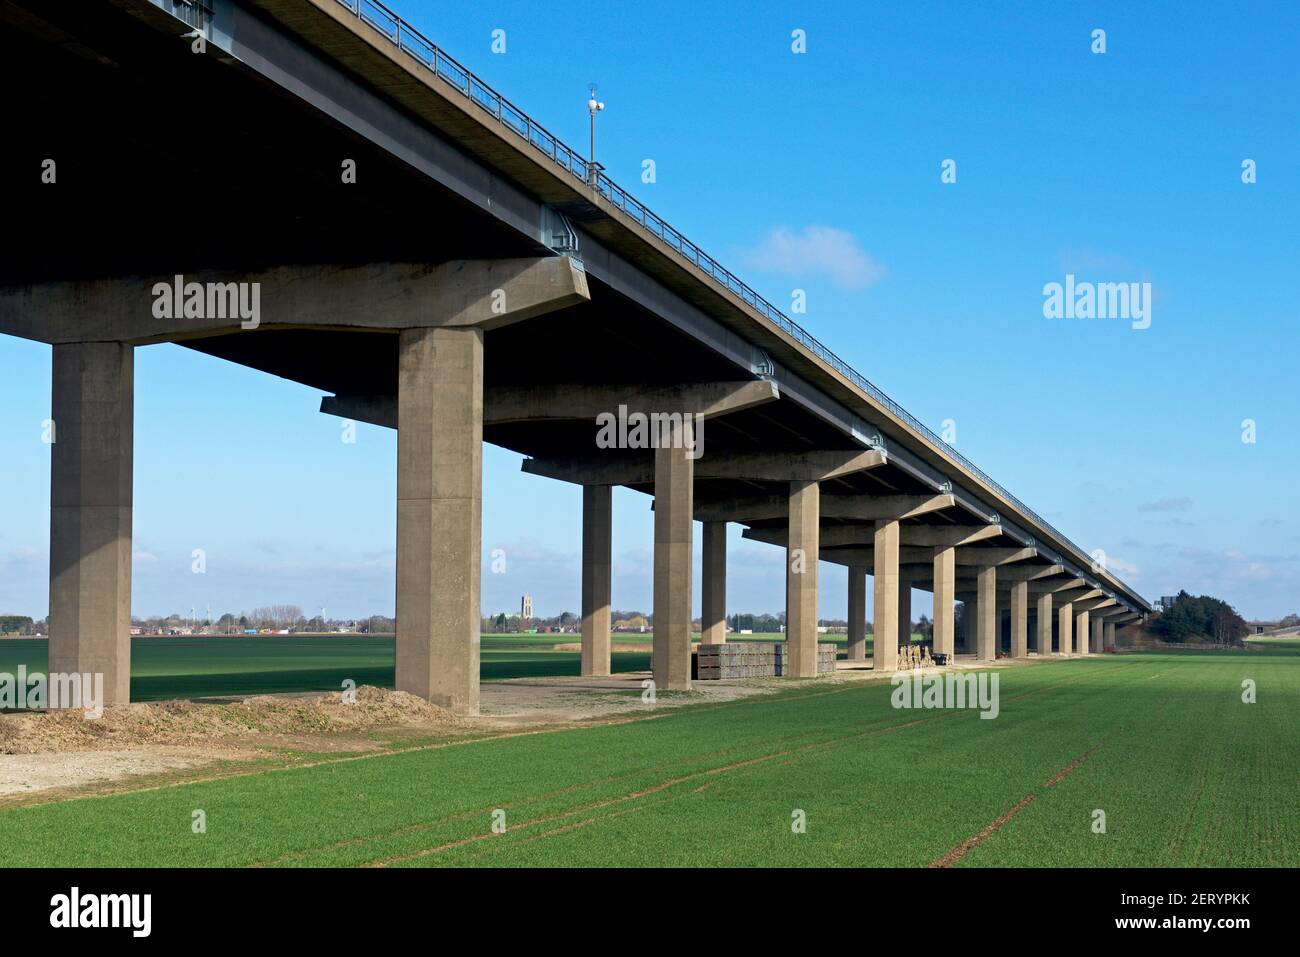 The bridge carrying the M62 motorway across the River Ouse, near Howden, East Yorkshire, England UK Stock Photo